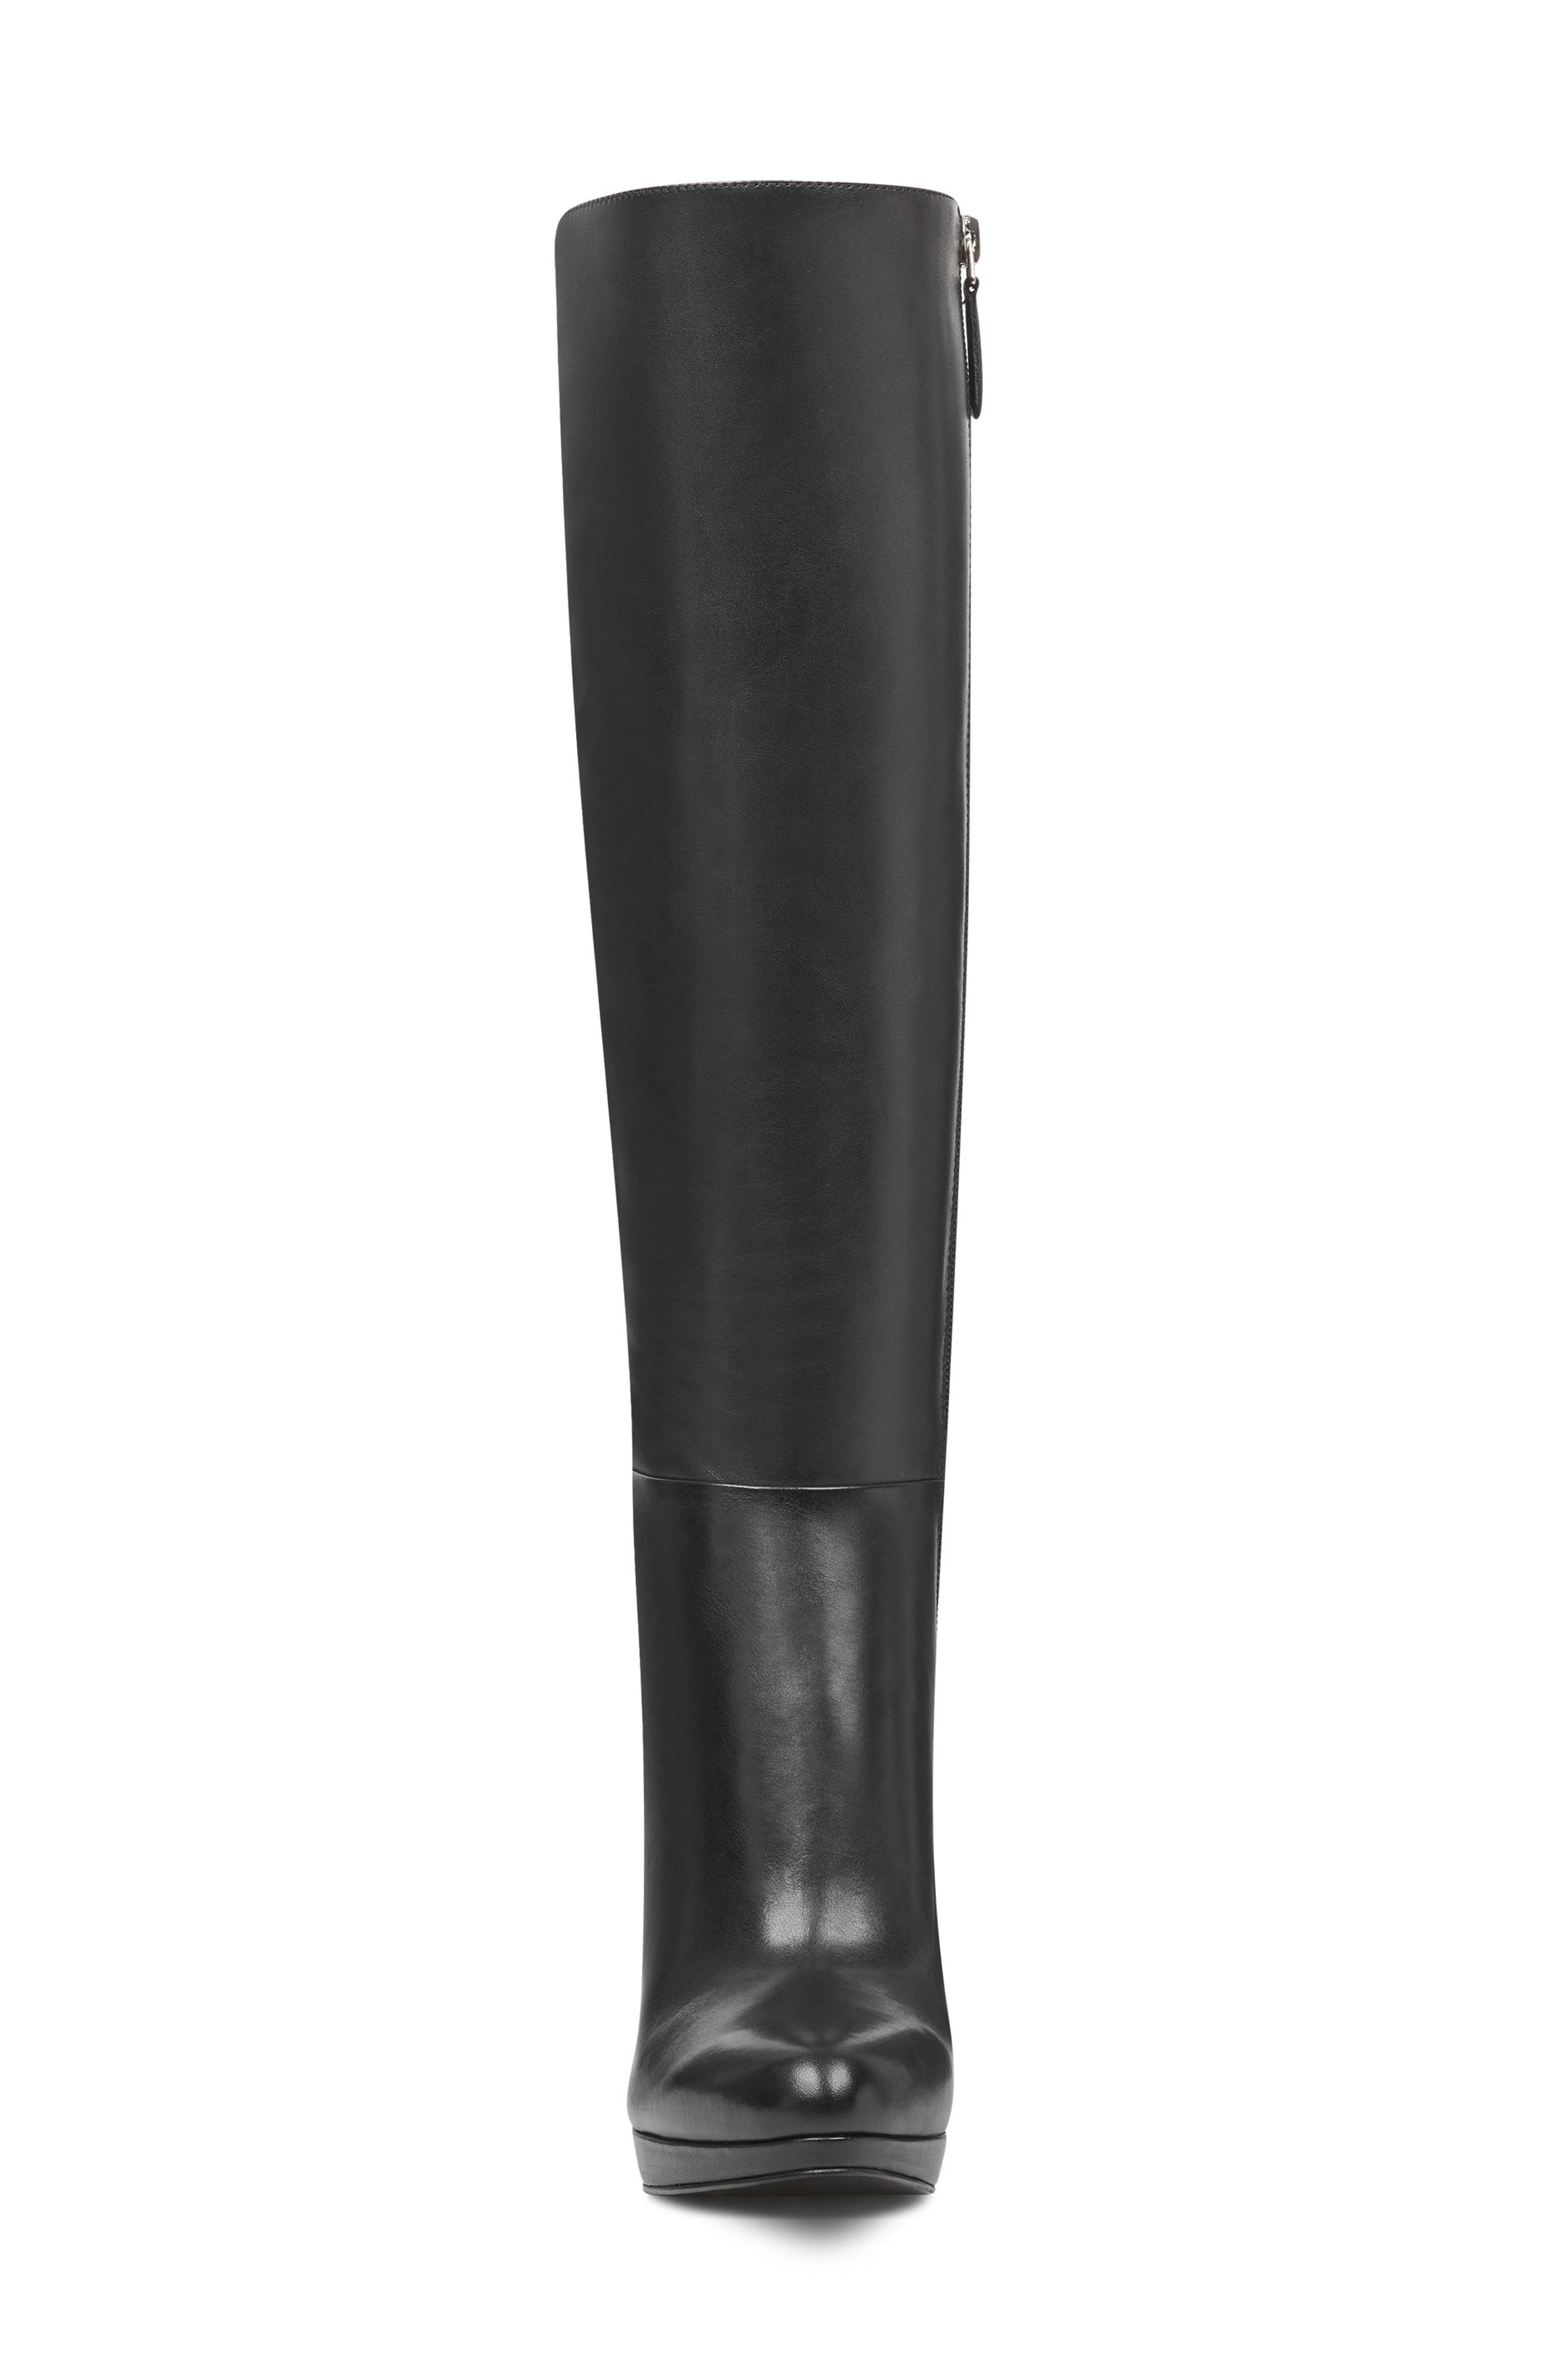 quizme knee high boot